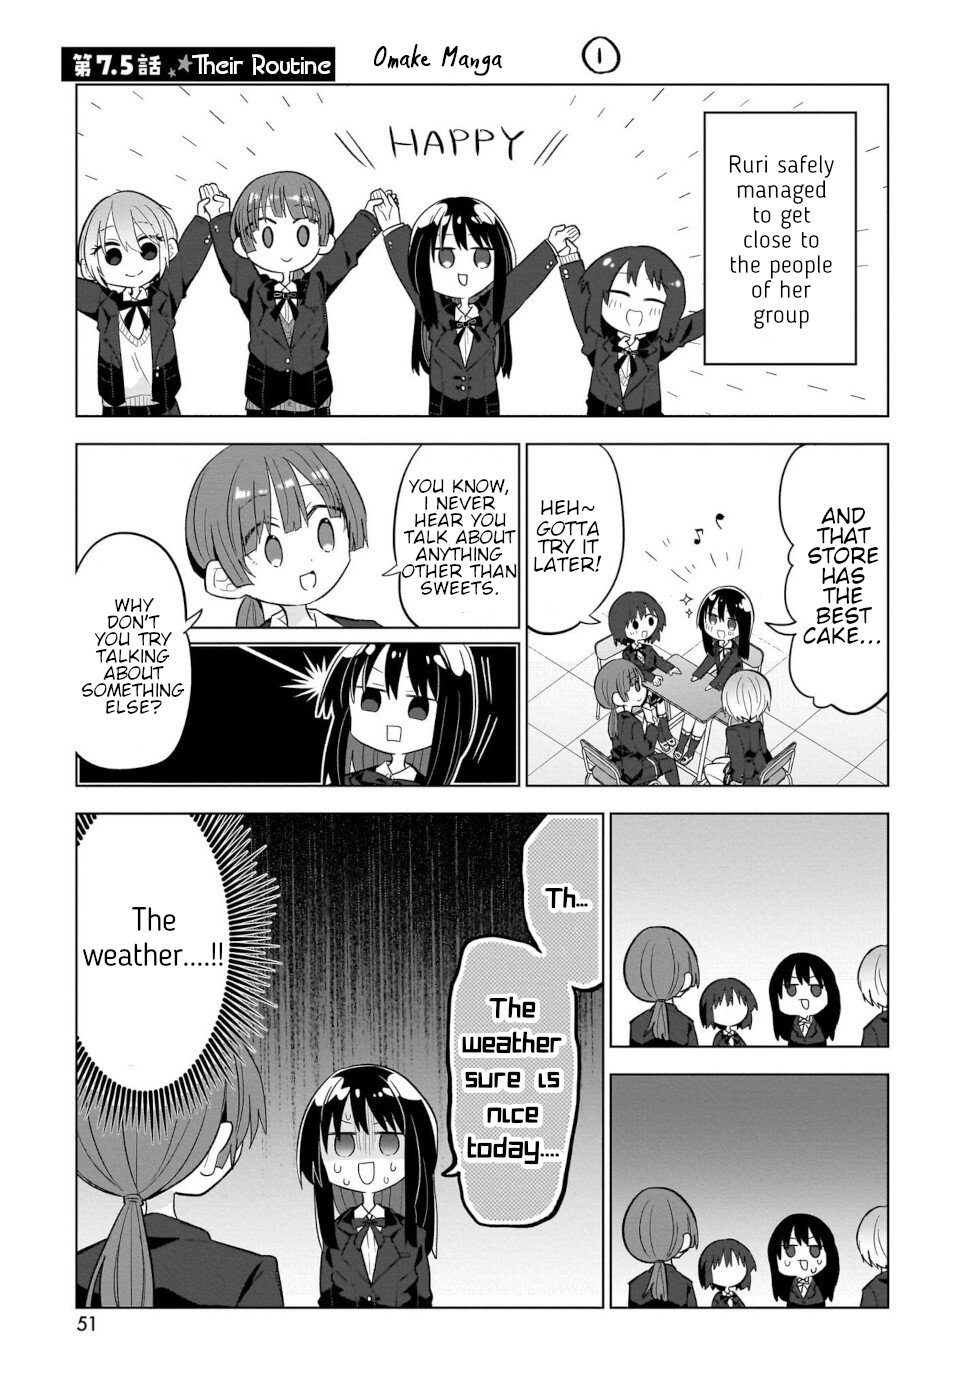 Sweets, Elf, And A High School Girl Vol.2 Chapter 7.5: Their Routine - Picture 1